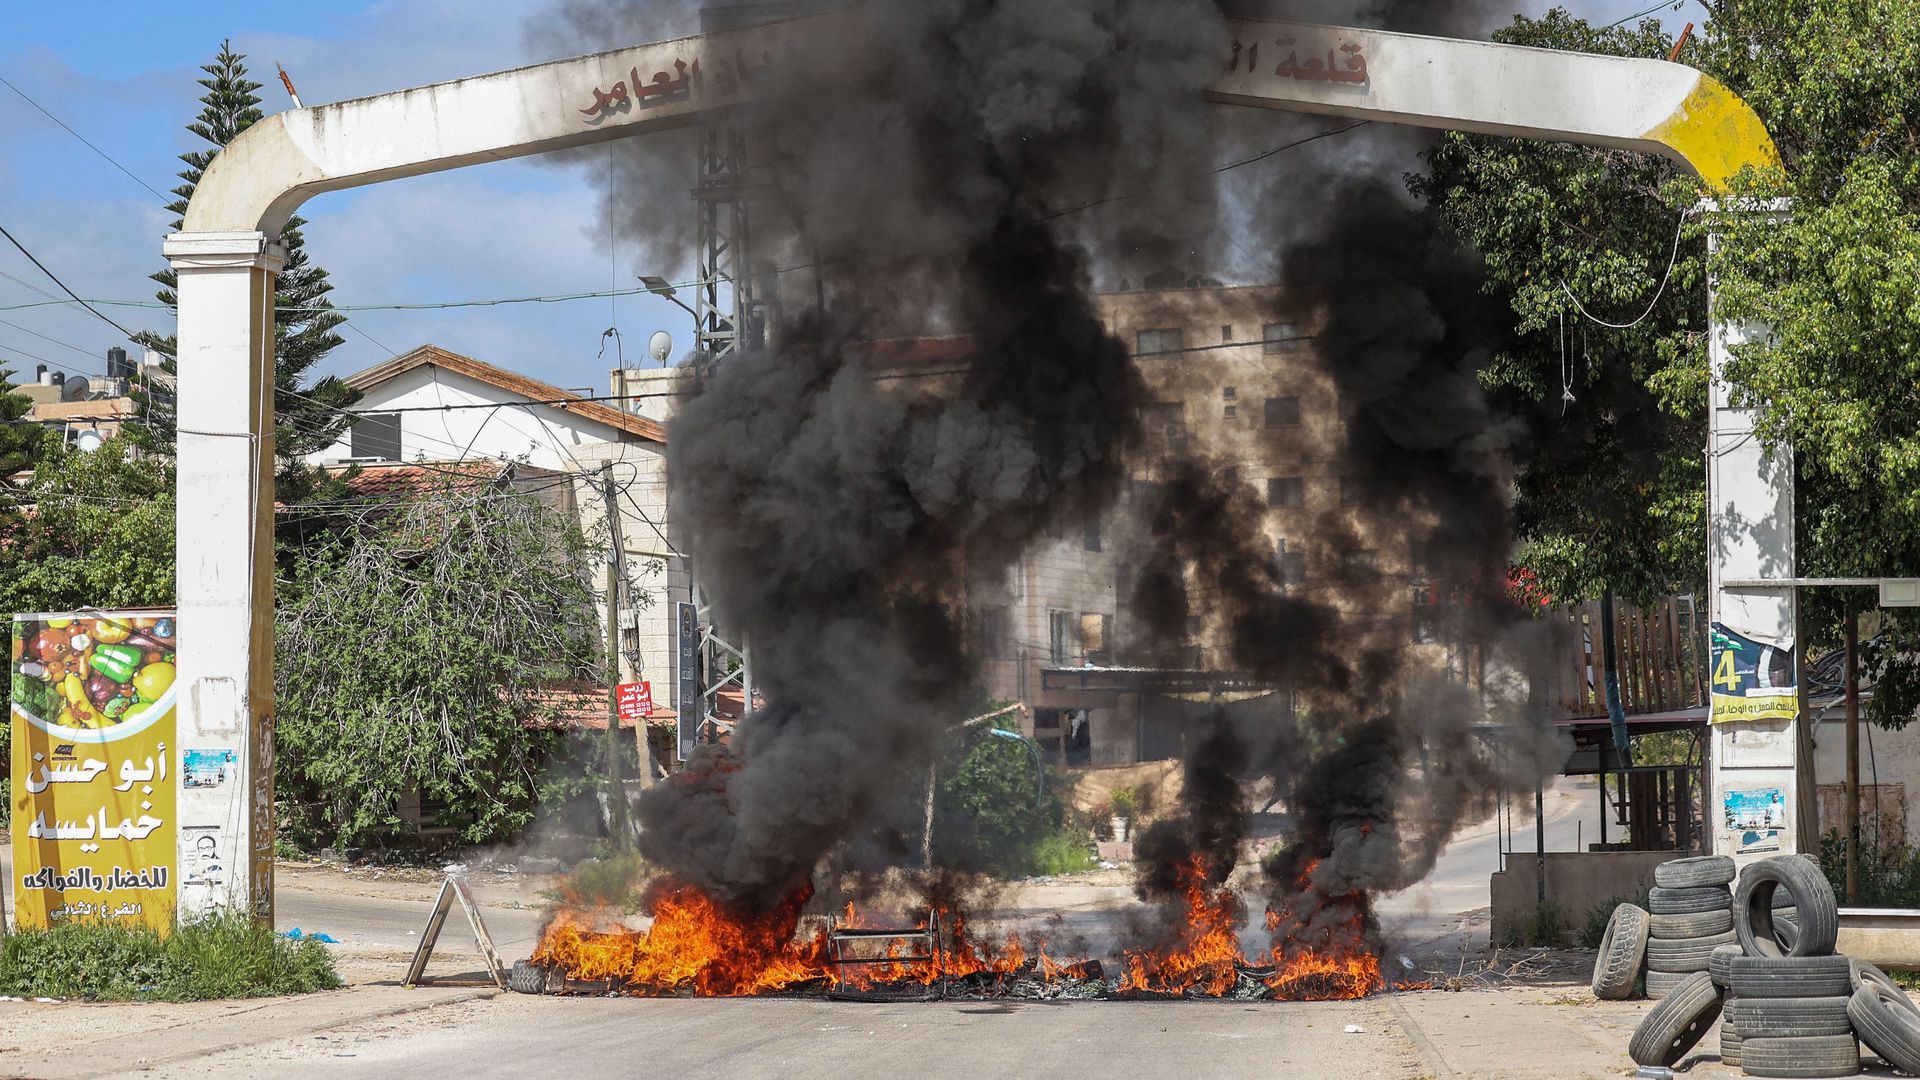 Tires are set aflame at an entrance to the Palestinian refugee camp of Jenin in the occupied West Bank on April 9. Photo: Jaafar Ashtiyeh/AFP via Getty Images